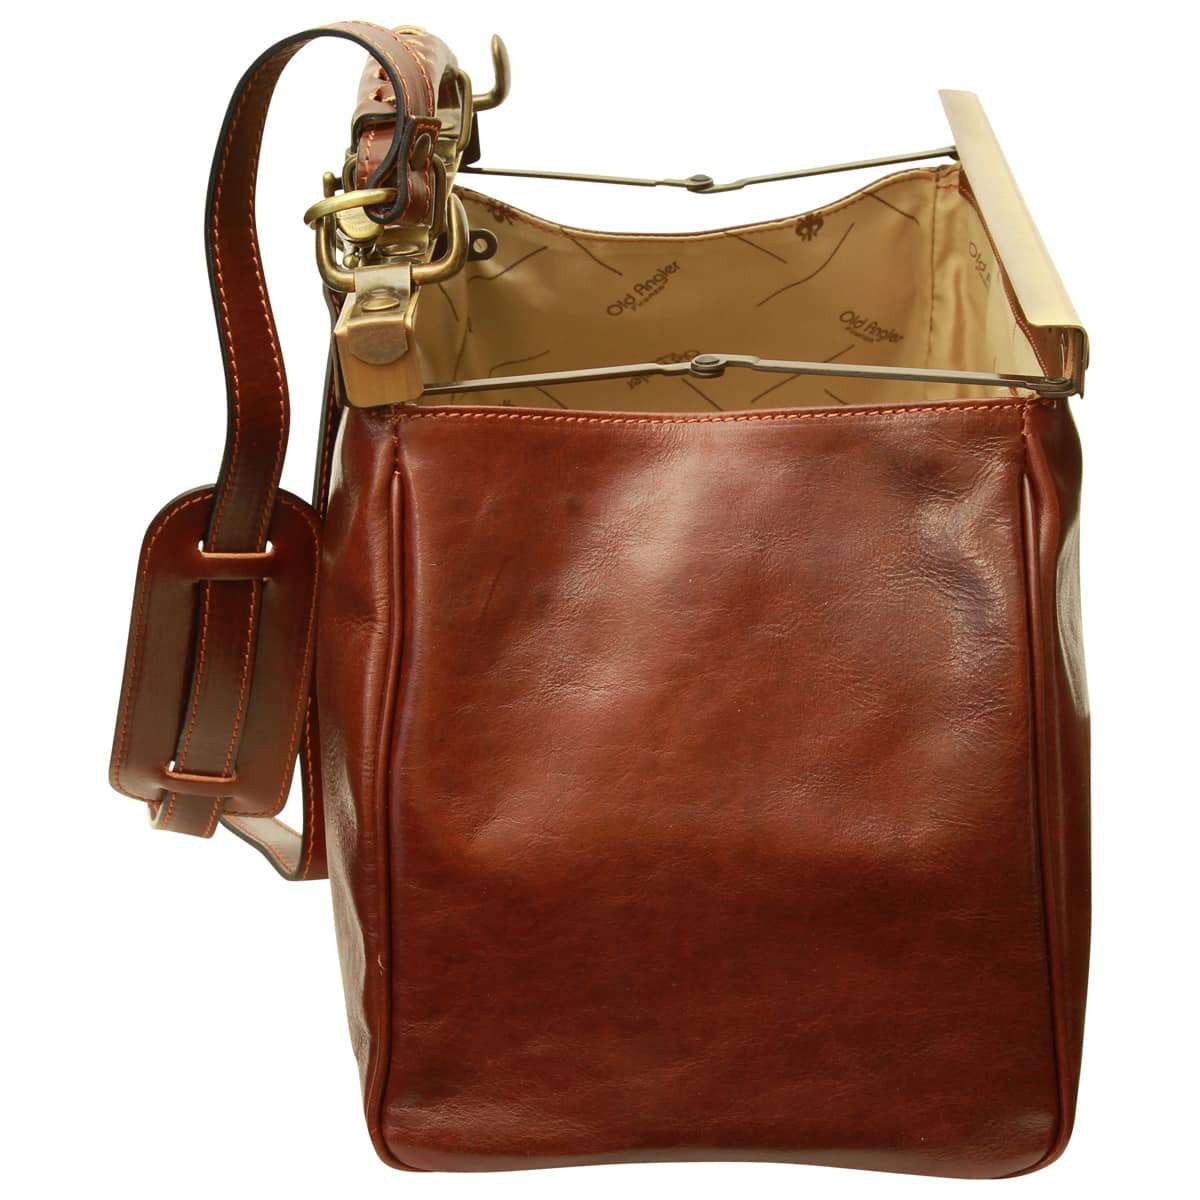 Leather bag - Brown | 084805MA US | Old Angler Firenze